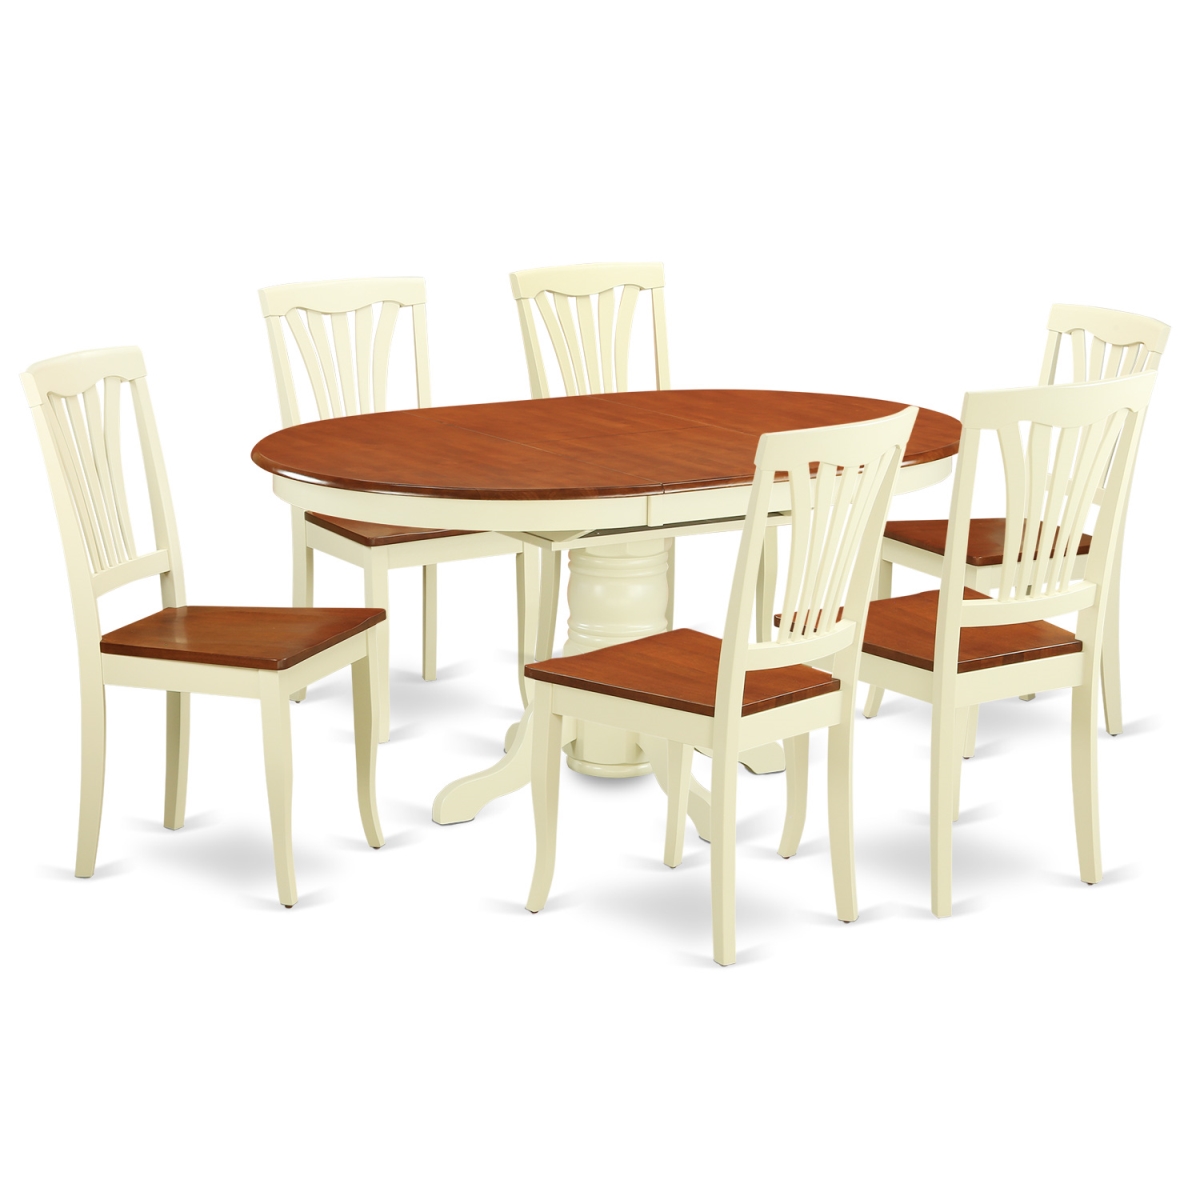 AVON7-WHI-W Dinette Table with Leaf & 6 Wood Seat Chairs, Buttermilk & Cherry - 7 Piece -  East West Furniture